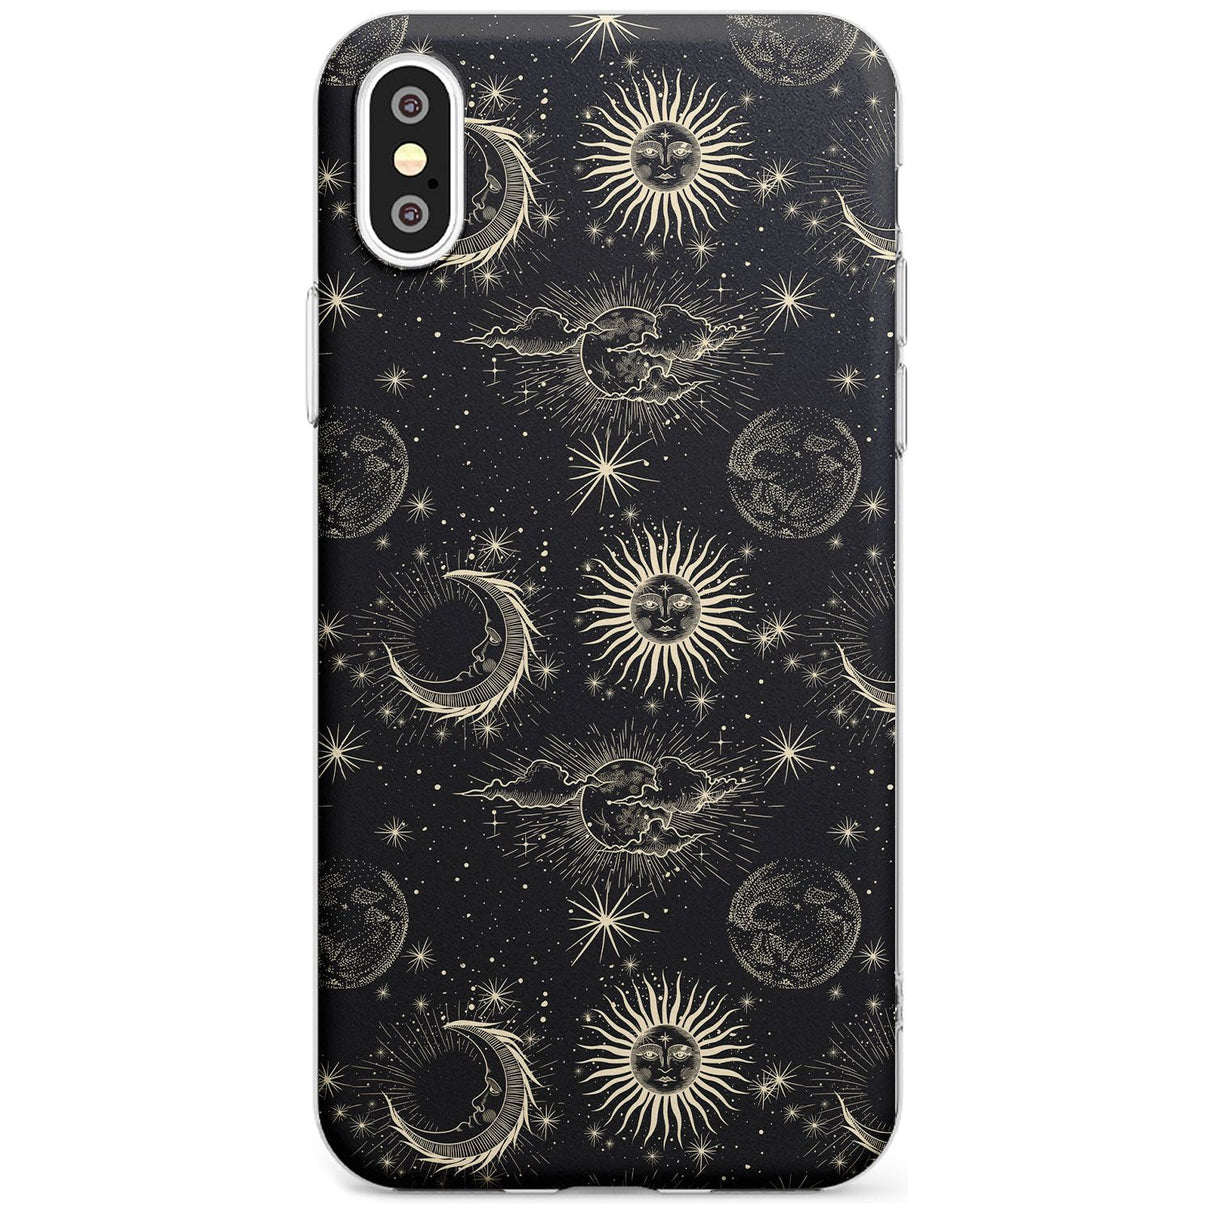 Large Suns, Moons & Clouds Black Impact Phone Case for iPhone X XS Max XR